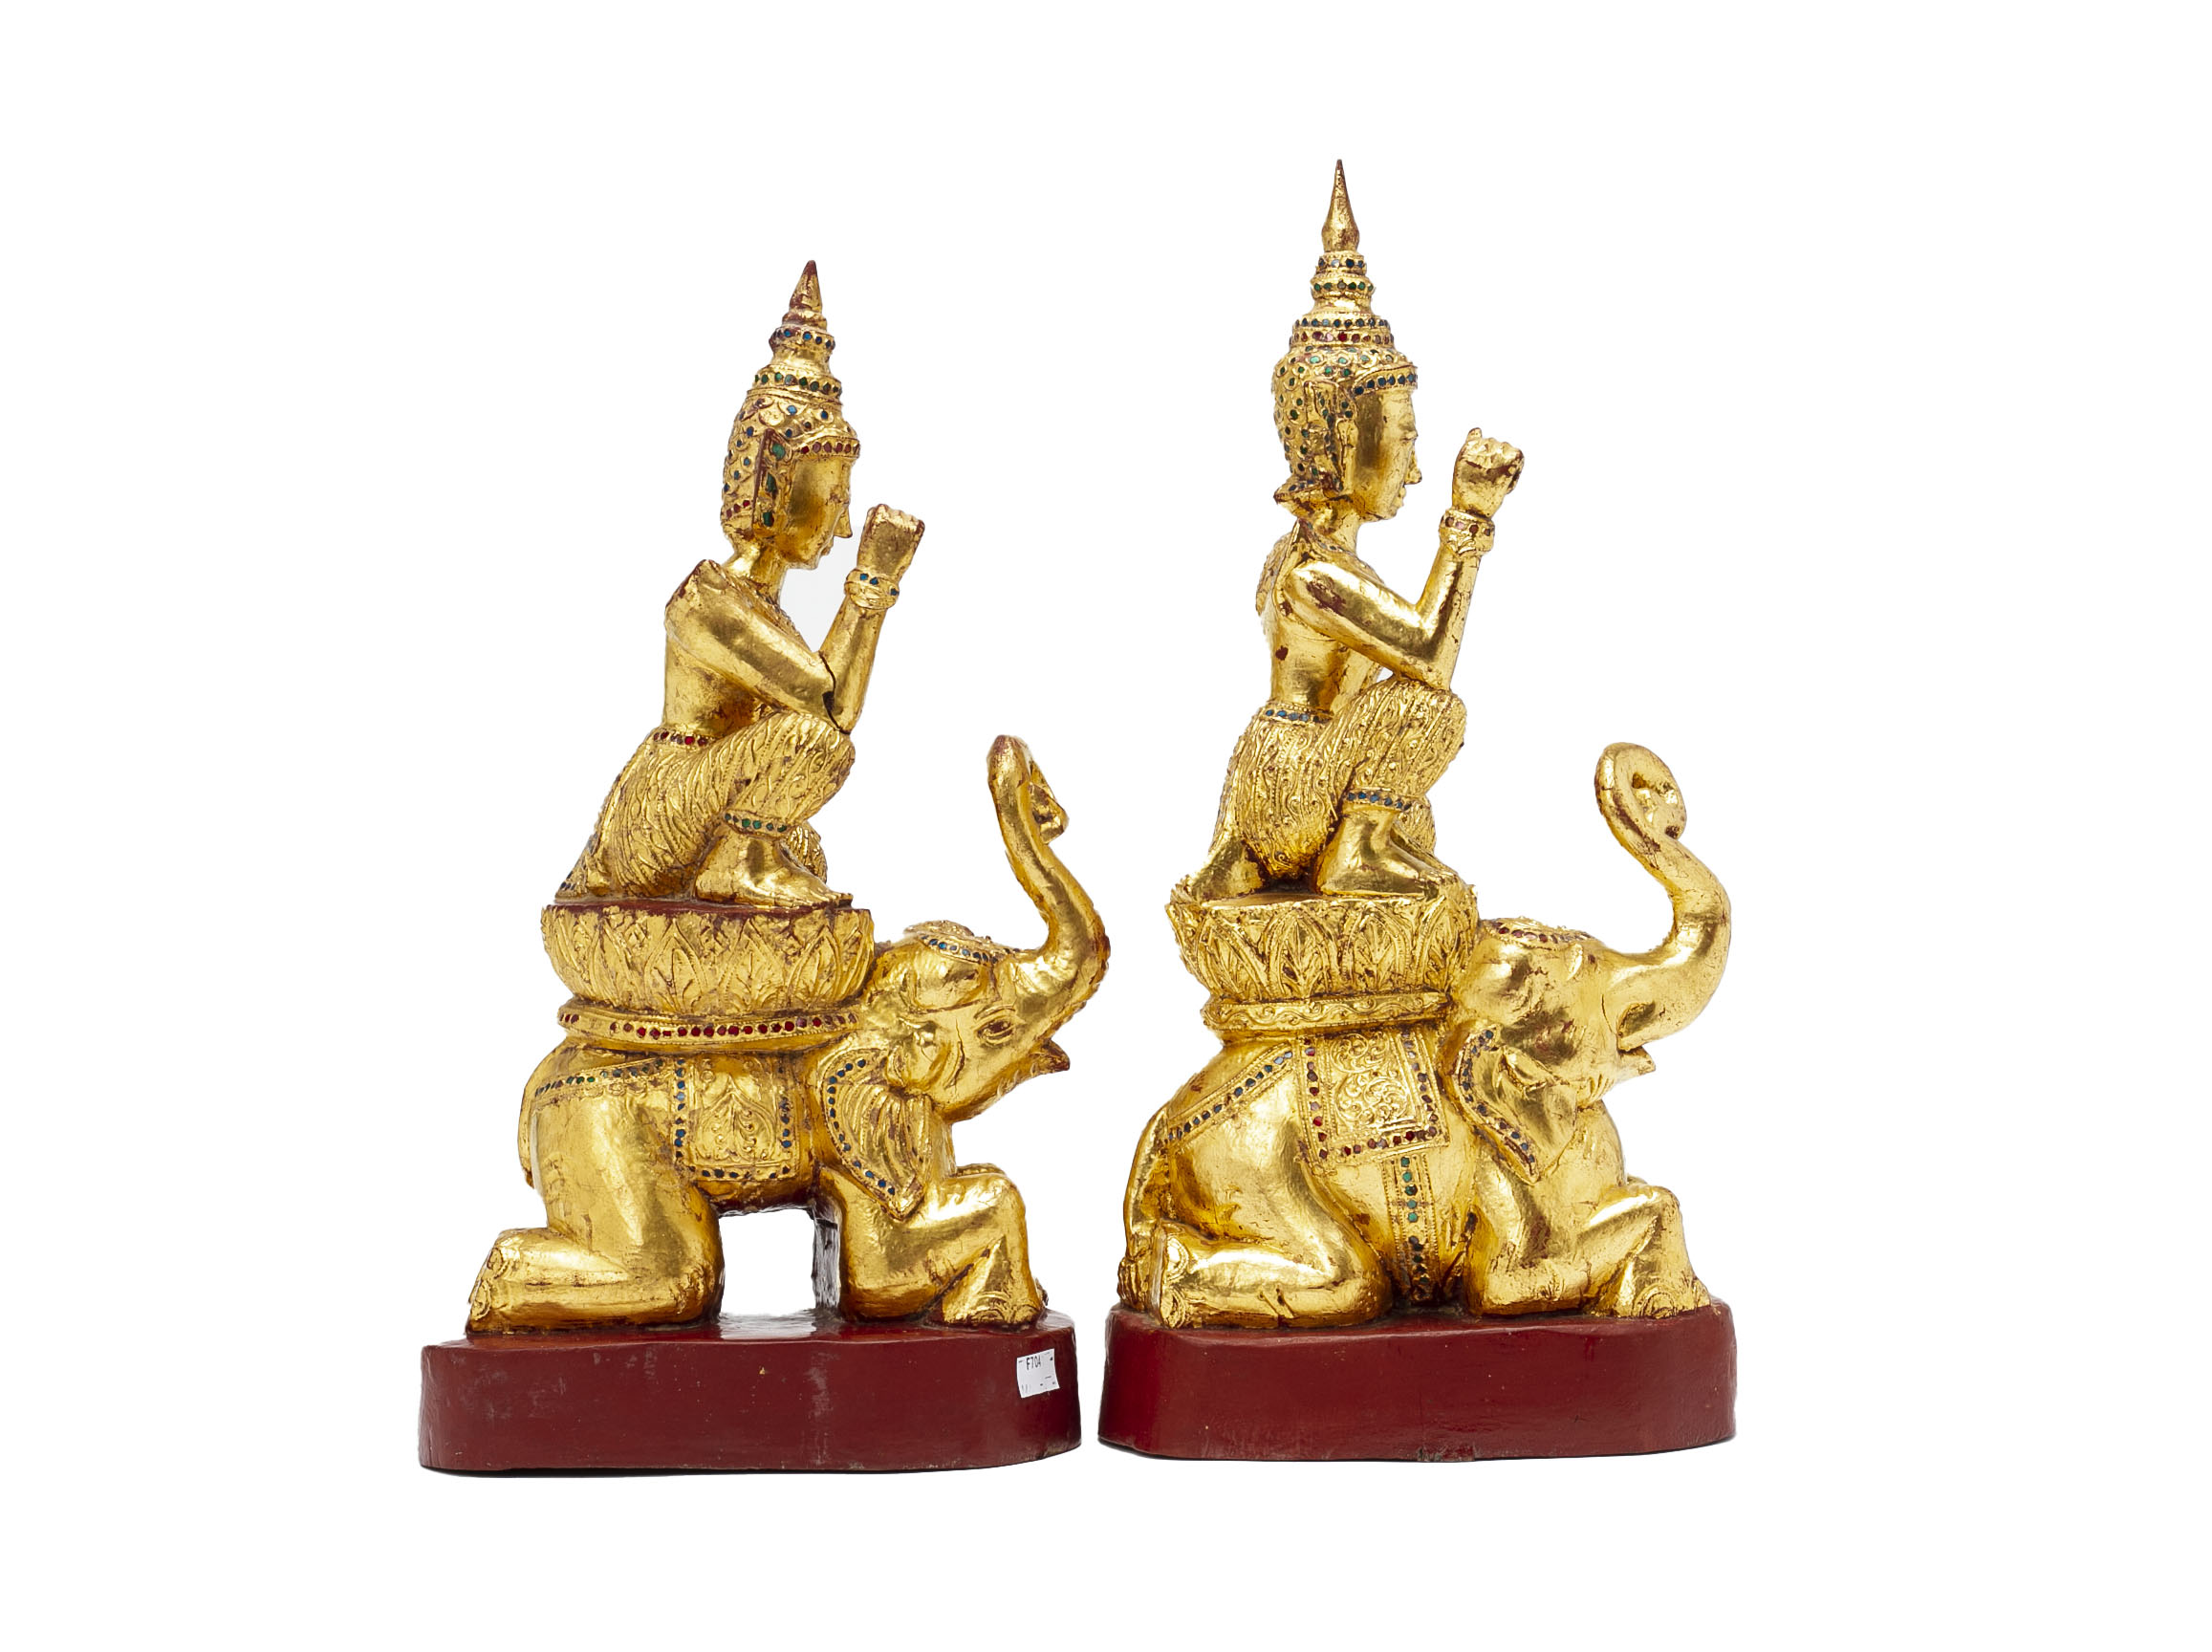 A PAIR OF SOUTHEAST ASIAN GILT FIGURES RIDING ELEPHANTS - Image 3 of 3